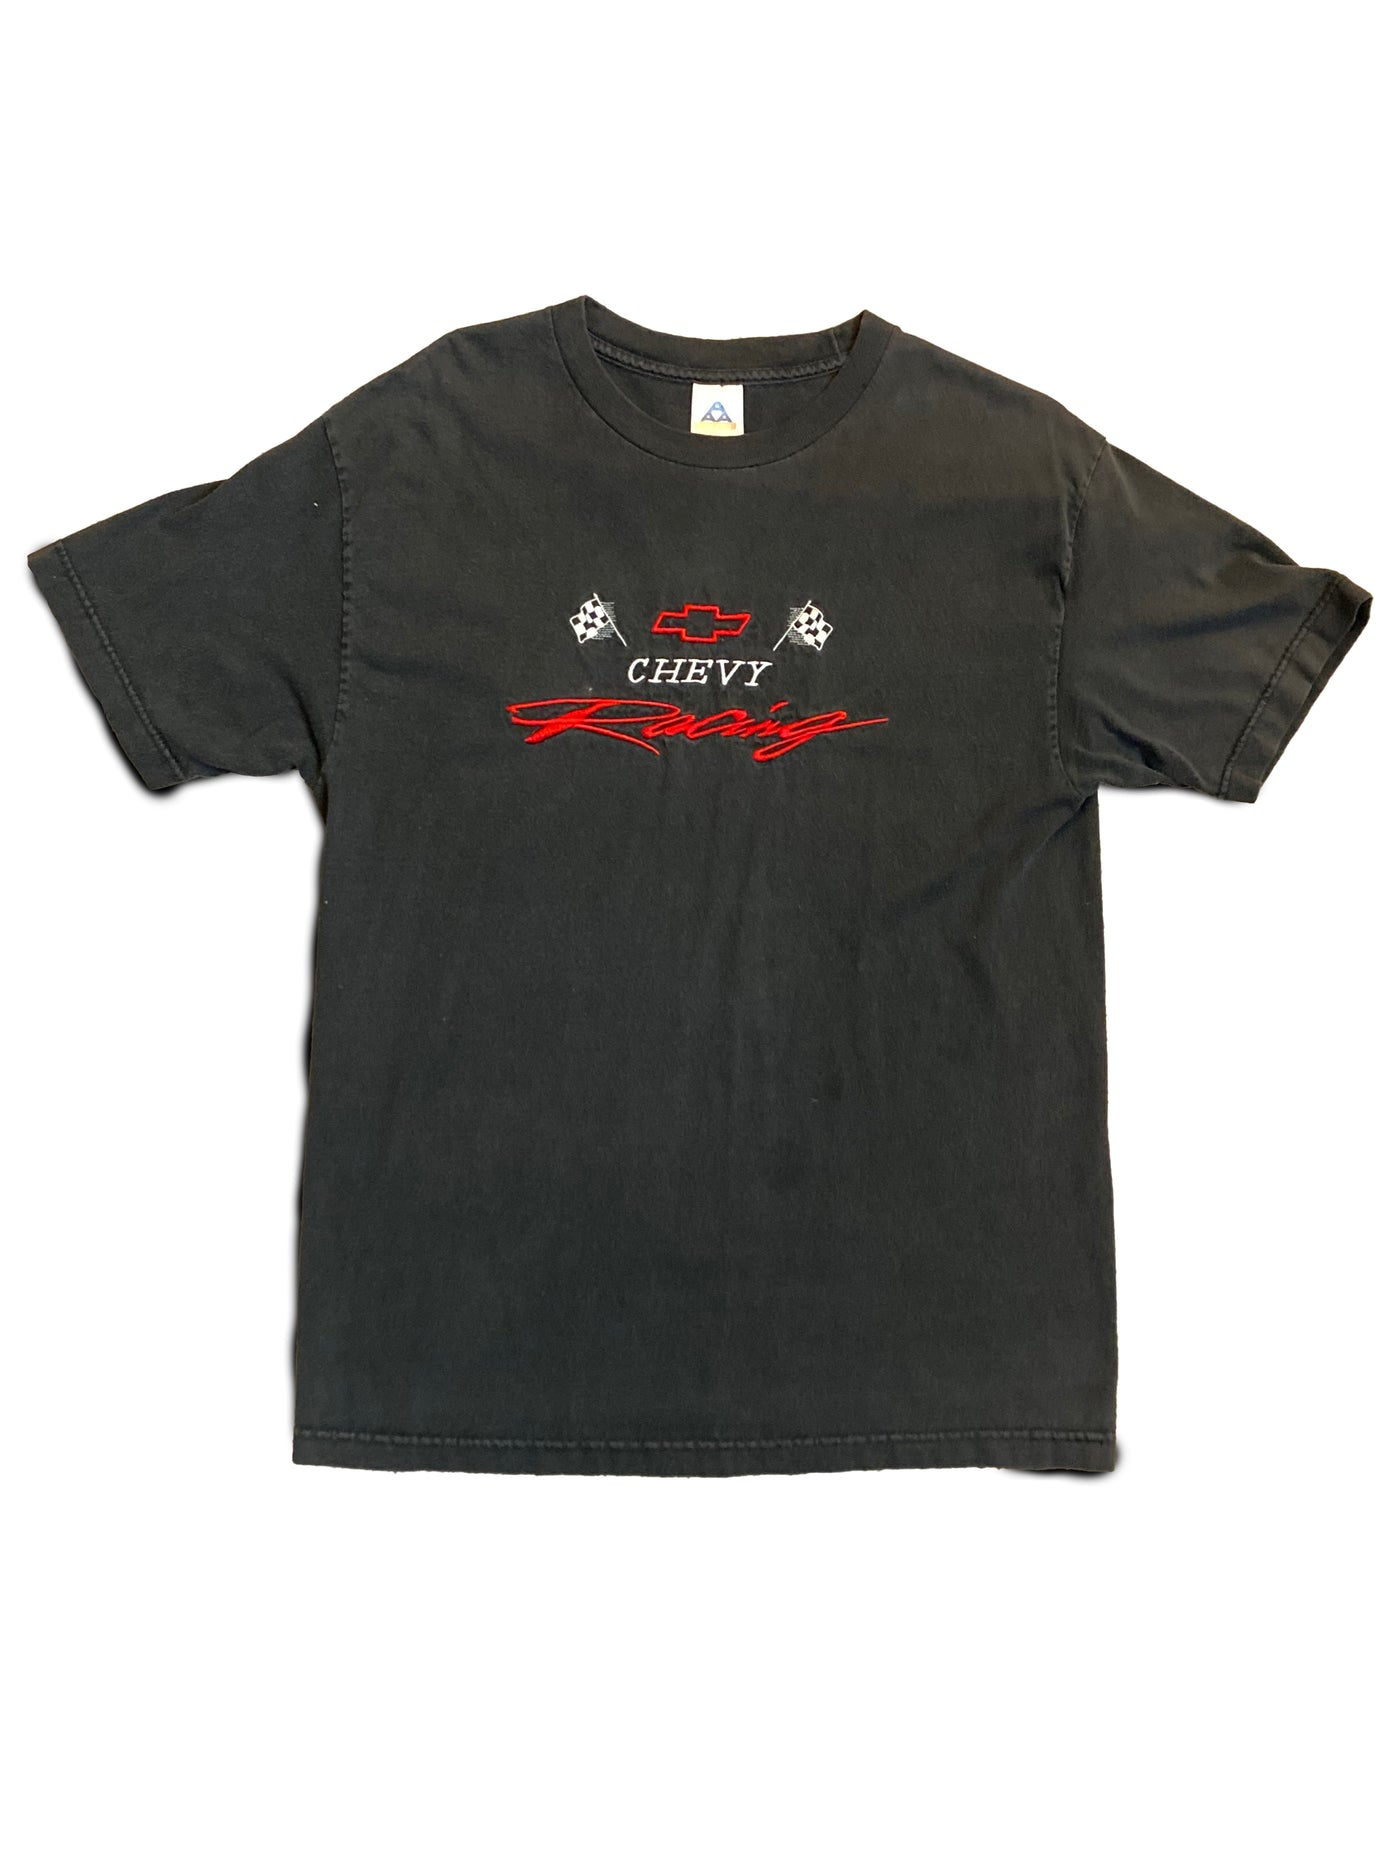 Vintage Allstyle Embroidered Chevy Racing T-Shirt